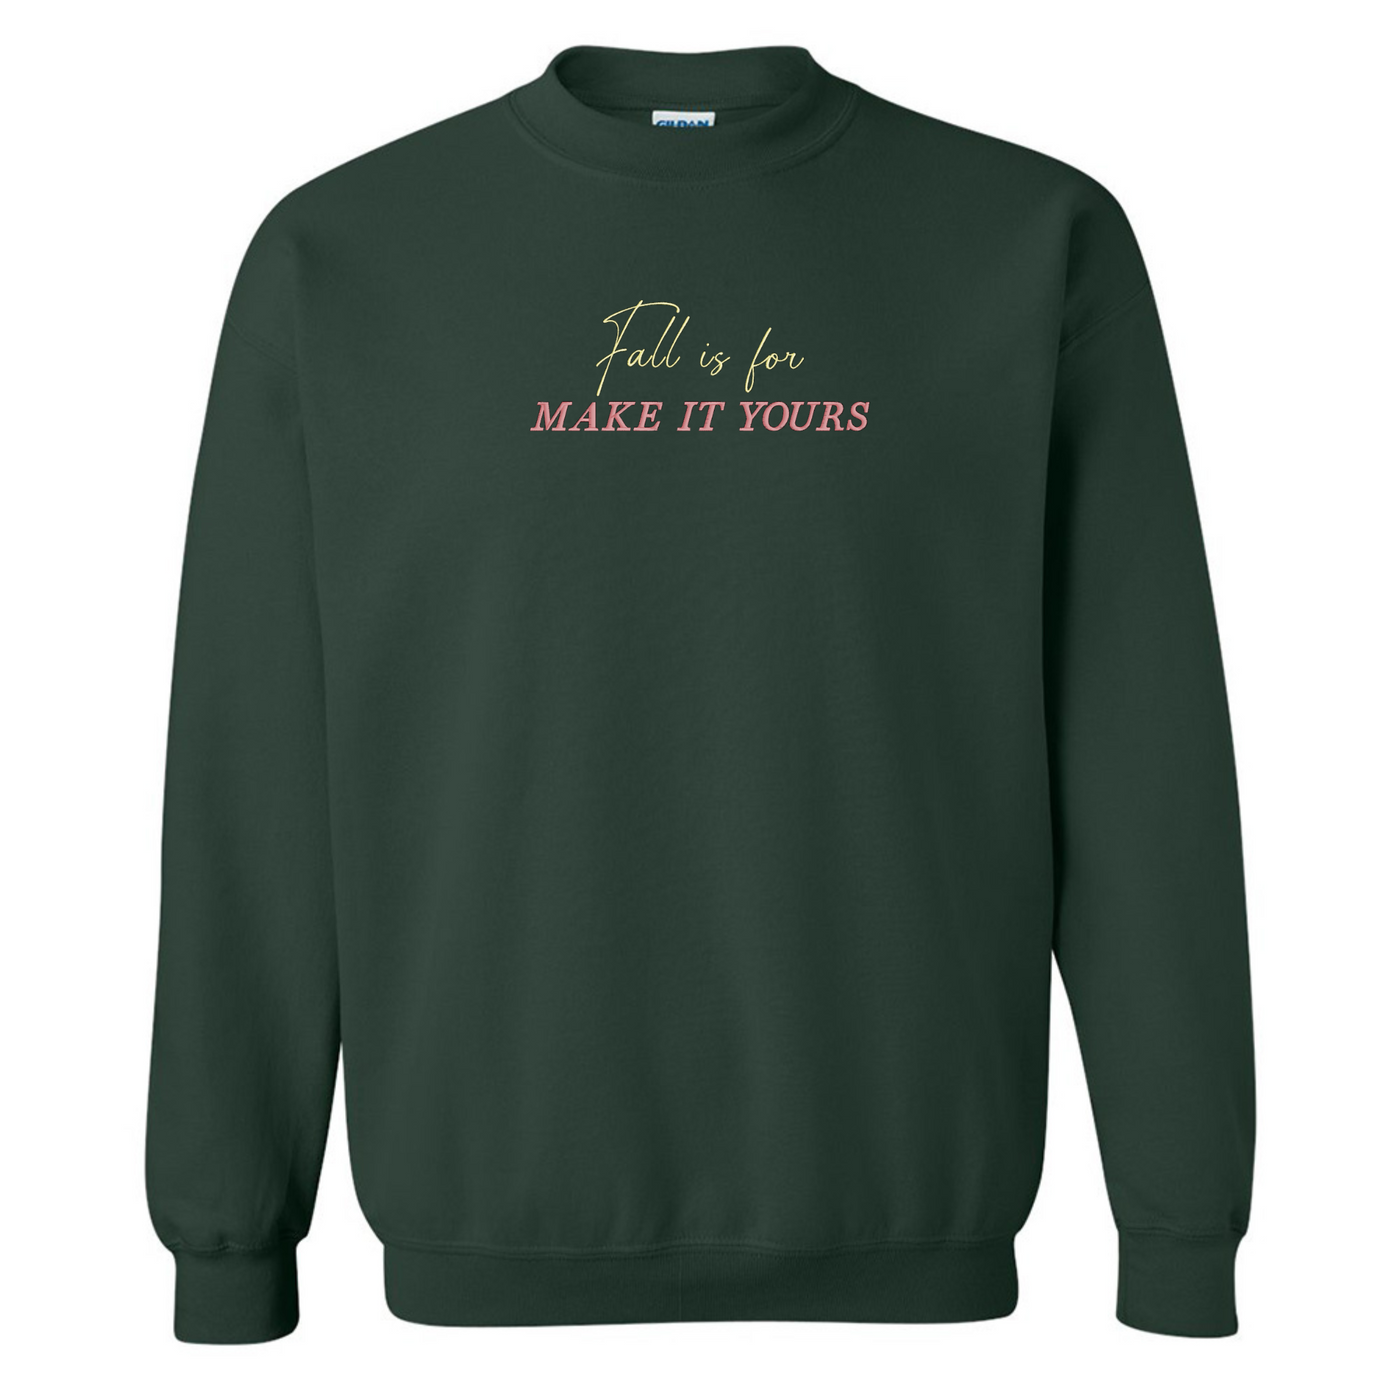 Make It Yours™ 'Fall Is For' Crewneck Sweatshirt